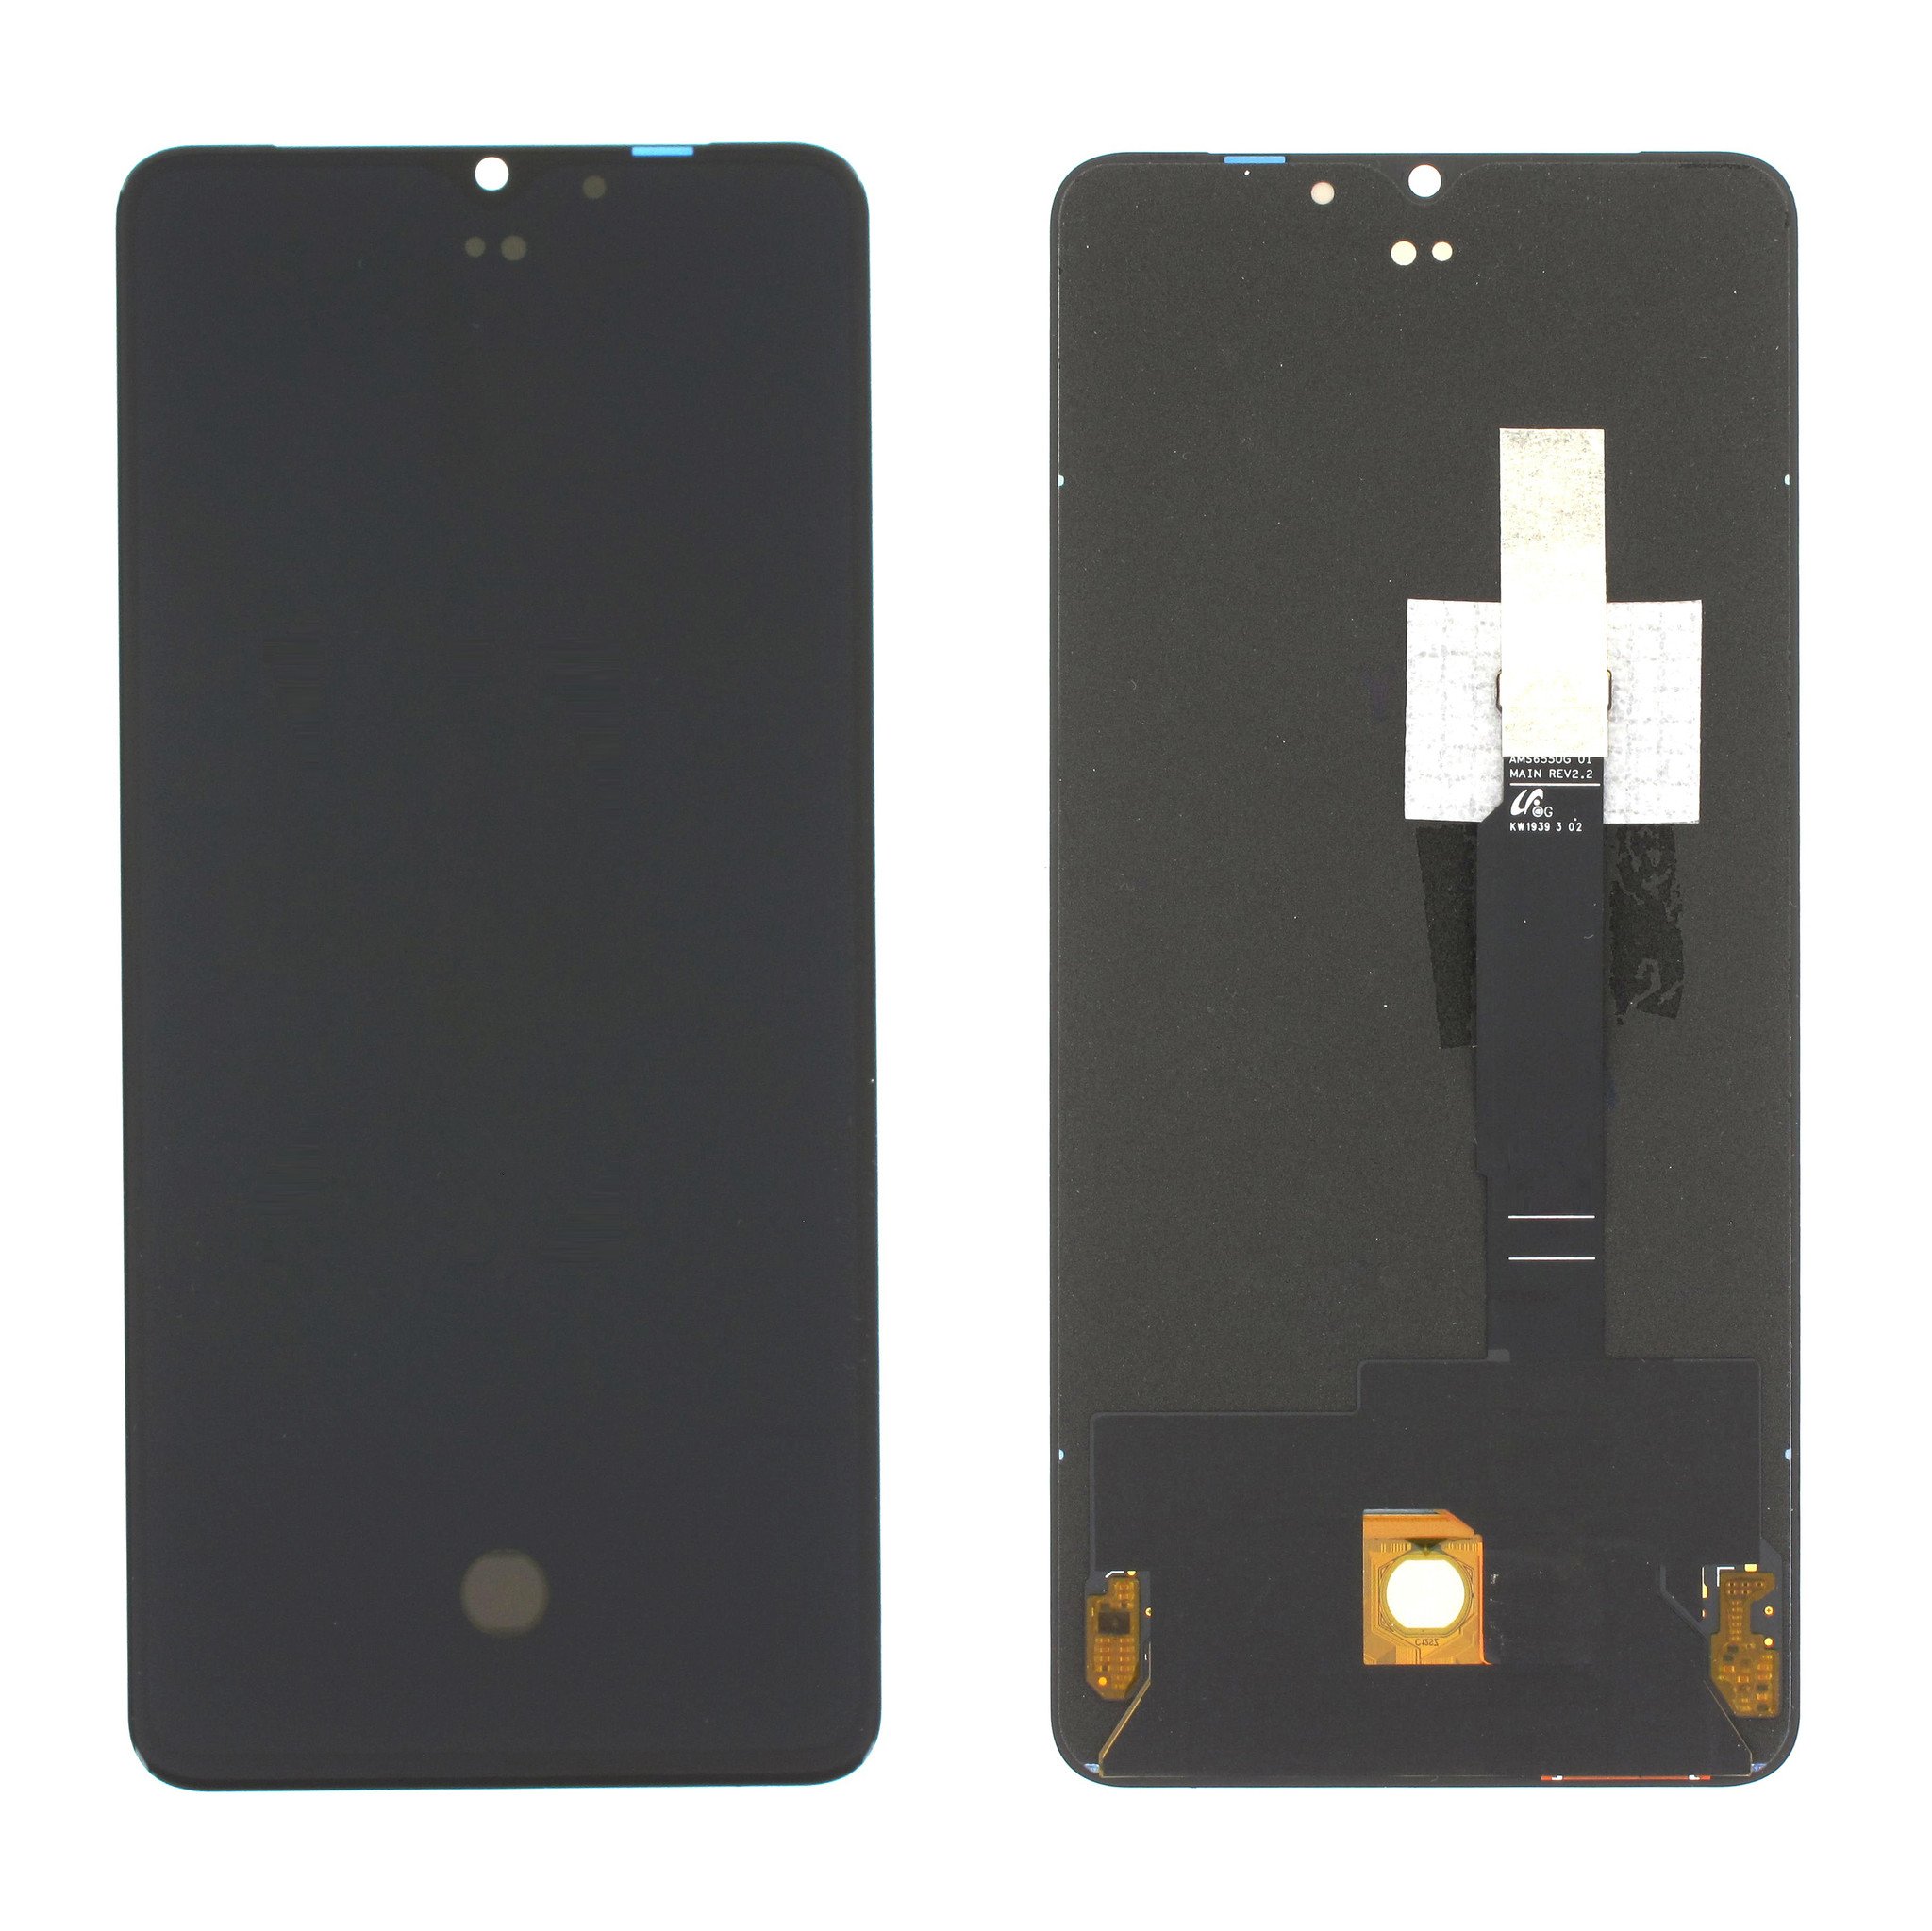 OnePlus 7T (HD1903) LCD Display, Schwarz, Excl. frame, OP7T-LCD-EX-BL